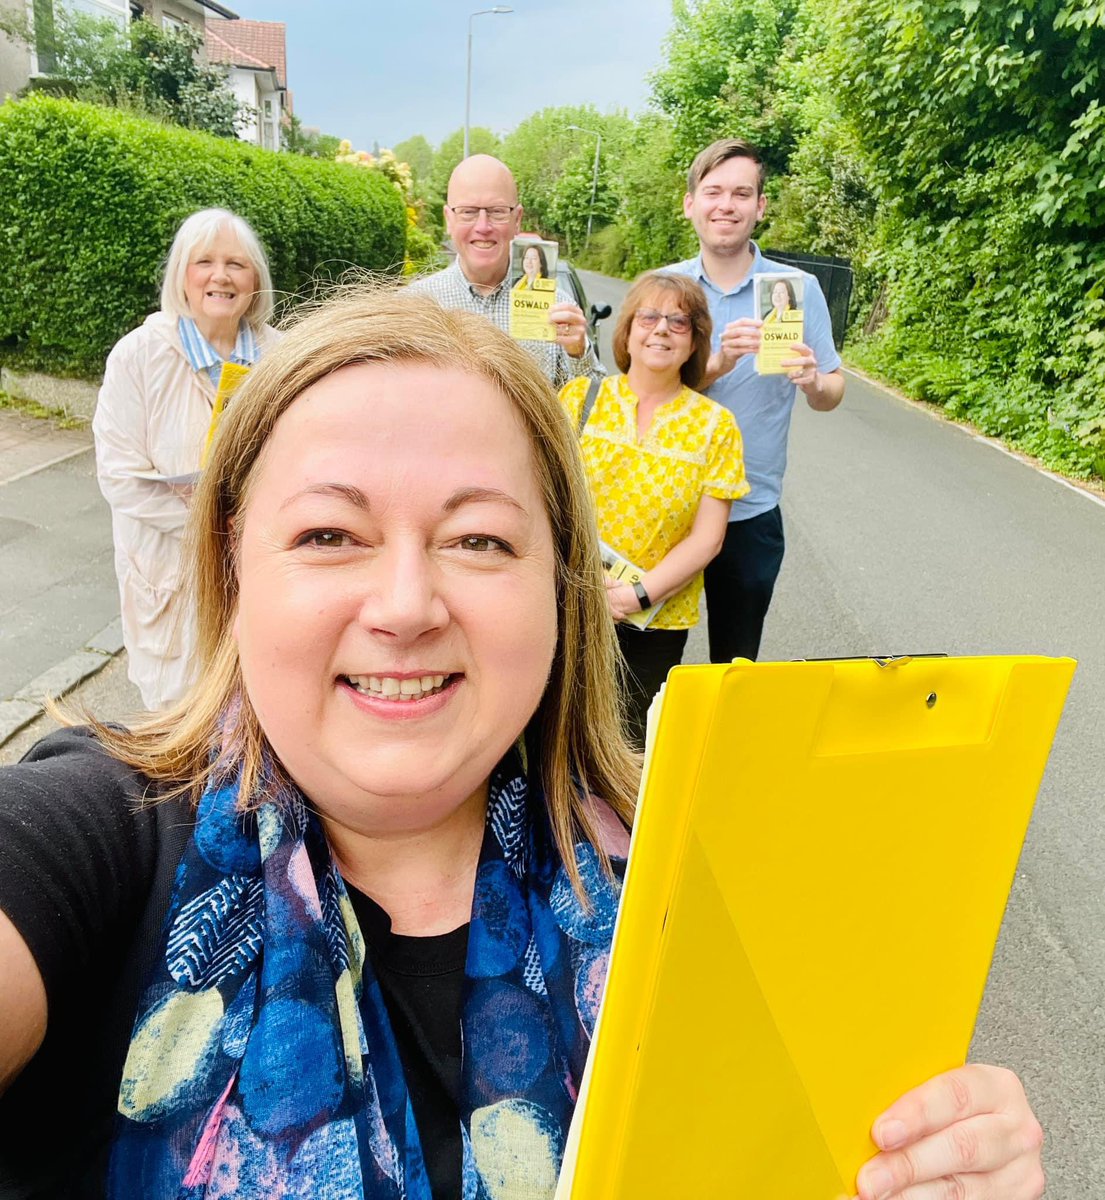 What a great day earlier campaigning for @kirstenoswald in Merrylee in the sun ☀️. It was absolutely gorgeous weather (not that you’d believe it now looking out the window). Thank you for all the chats, very positive. 

@EastwoodSNP @BNUSNP @EastRenSNP